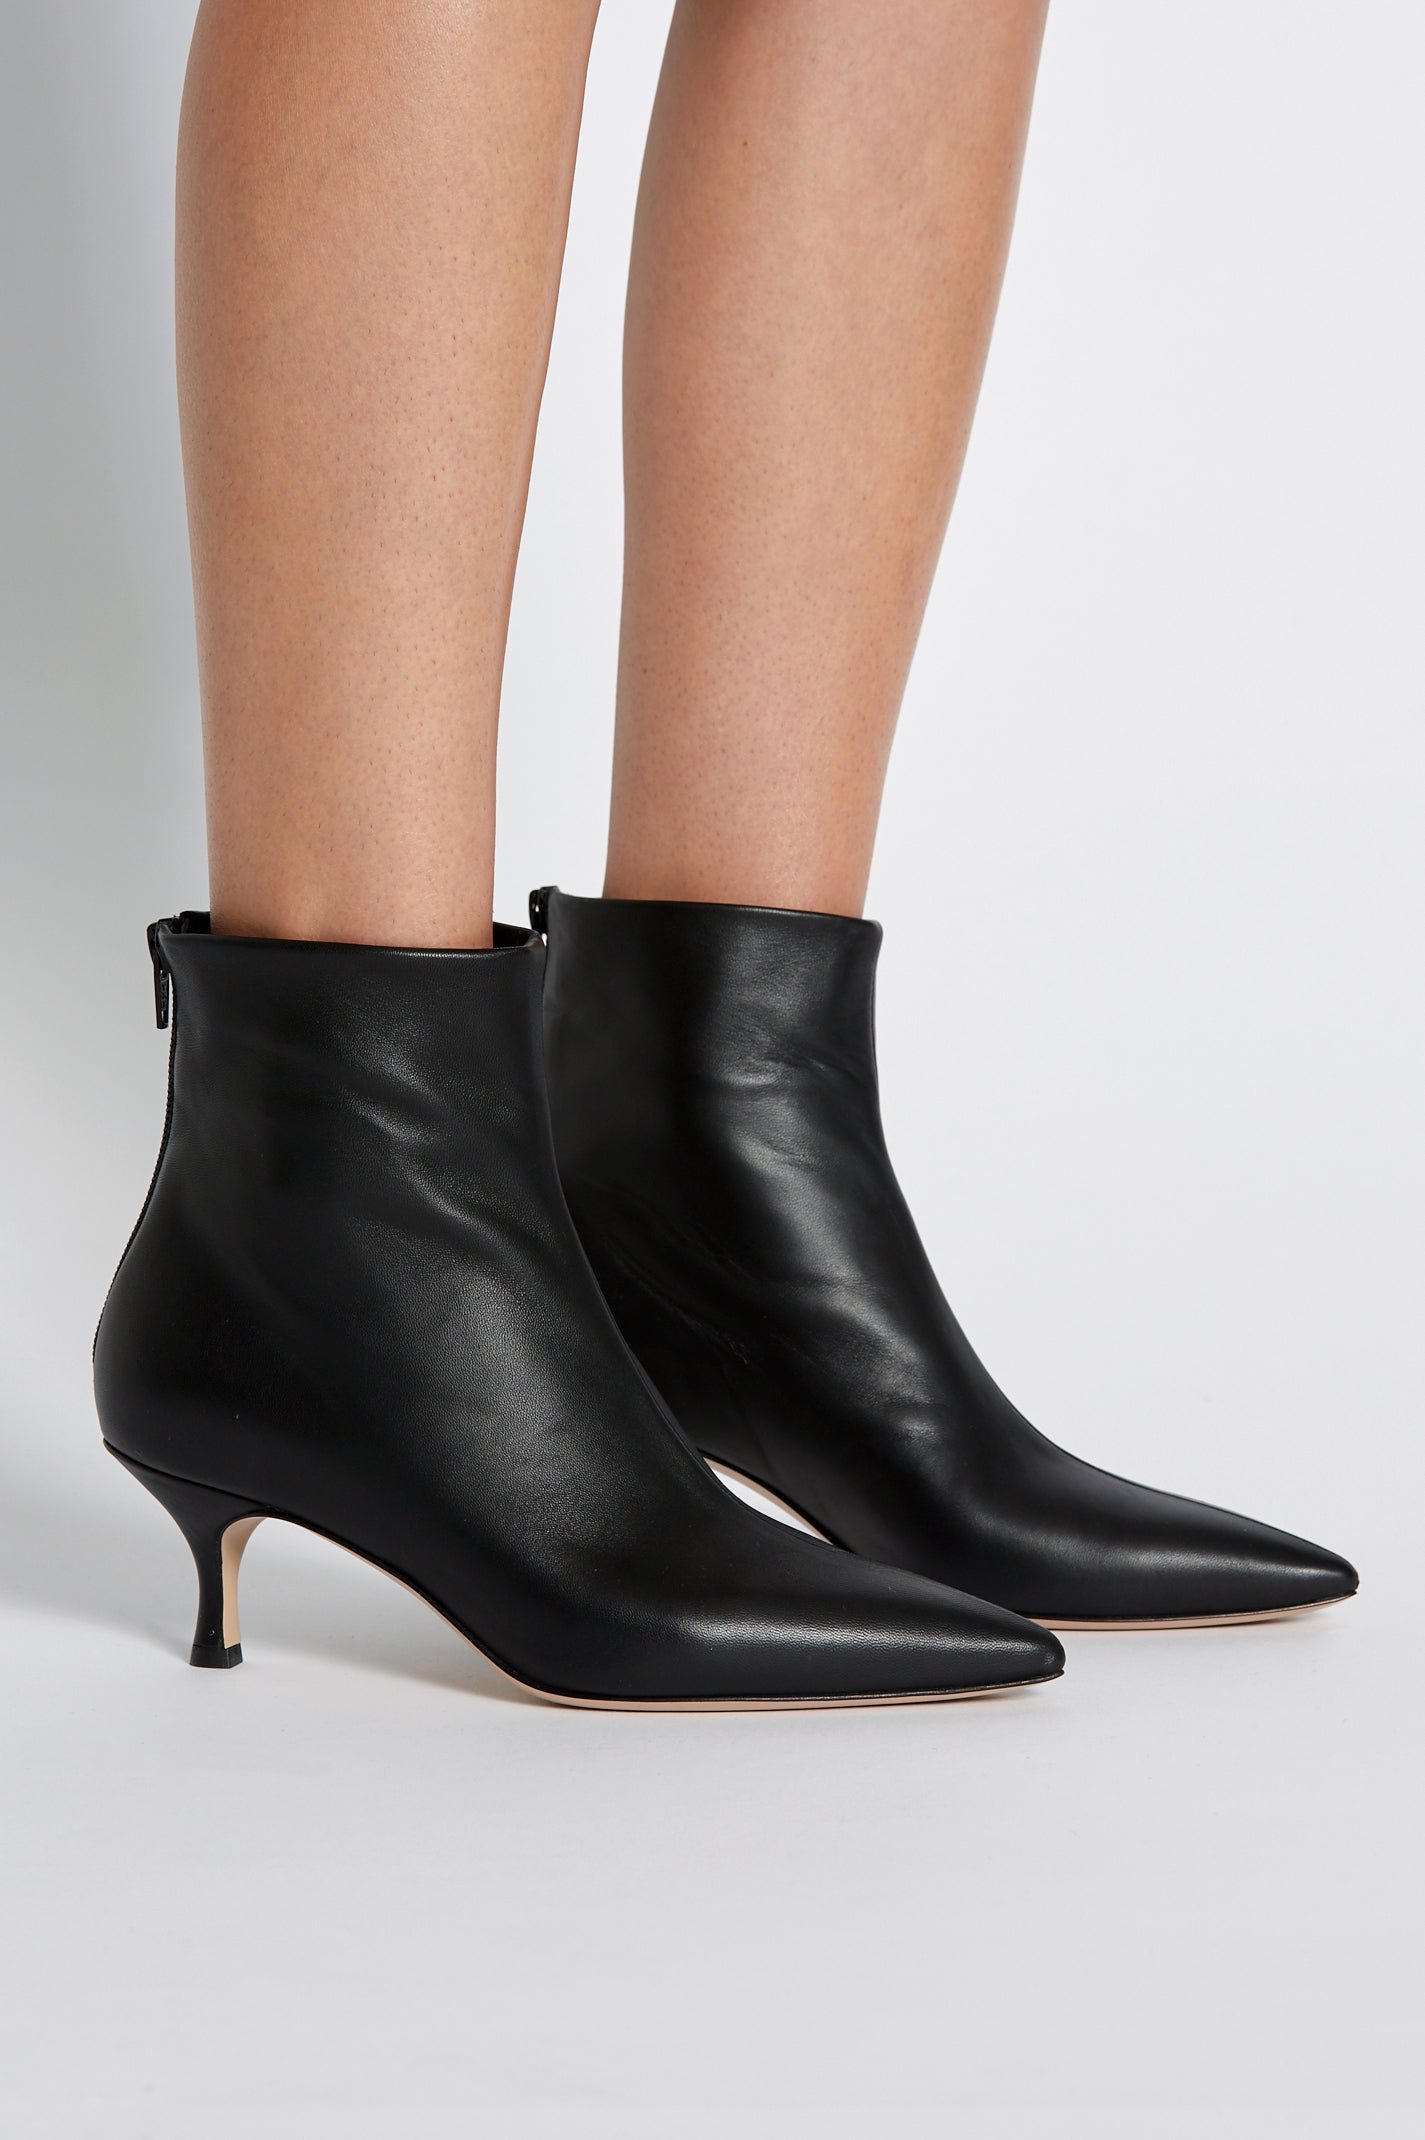 dresses you can wear with ankle boots